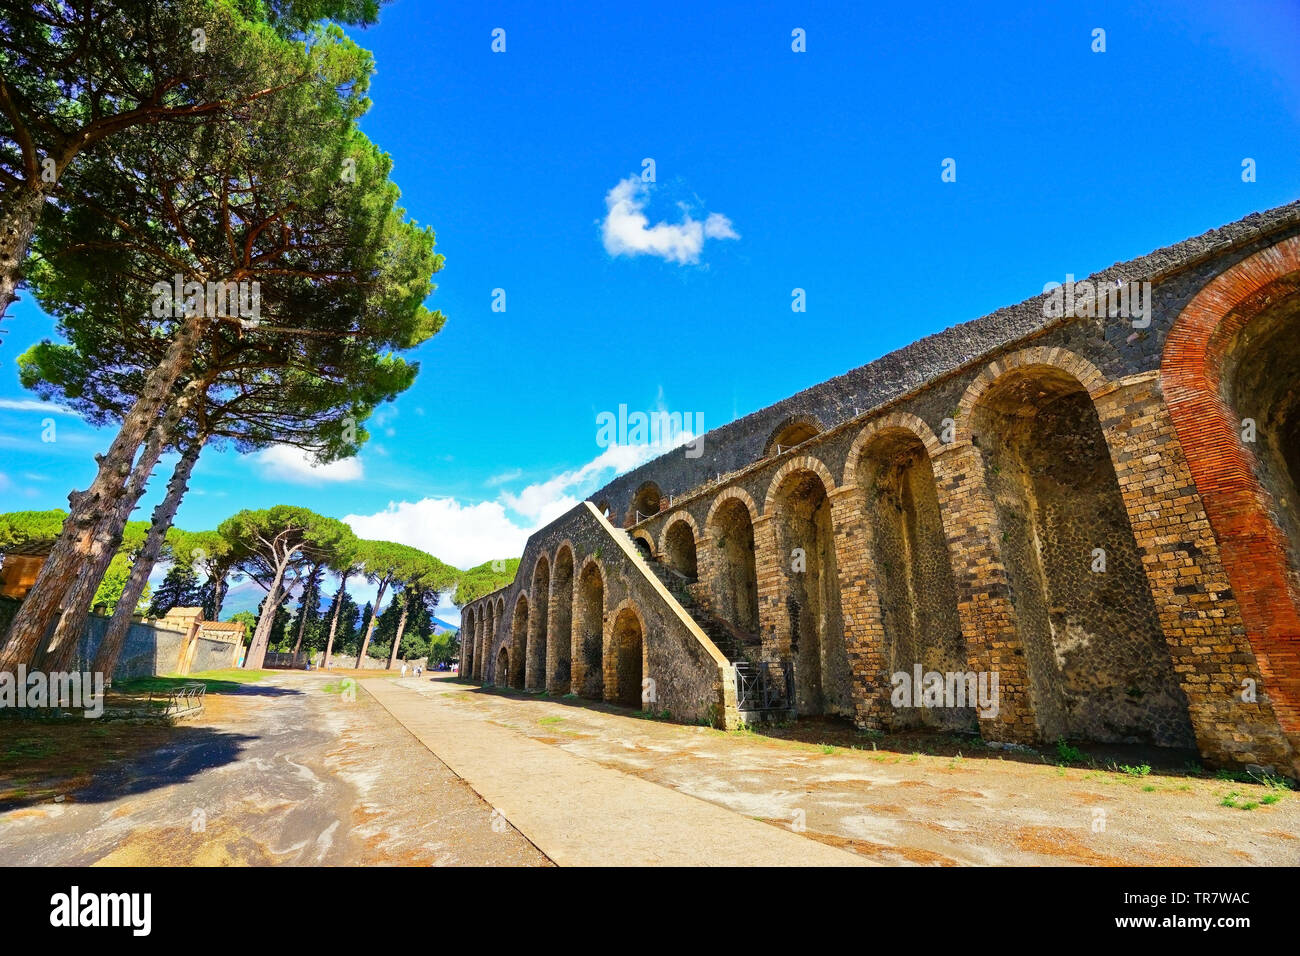 View of the roman ruins destroyed by the eruption of Mount Vesuvius centuries ago at Pompeii Archaeological Park in Pompei, Italy. Stock Photo